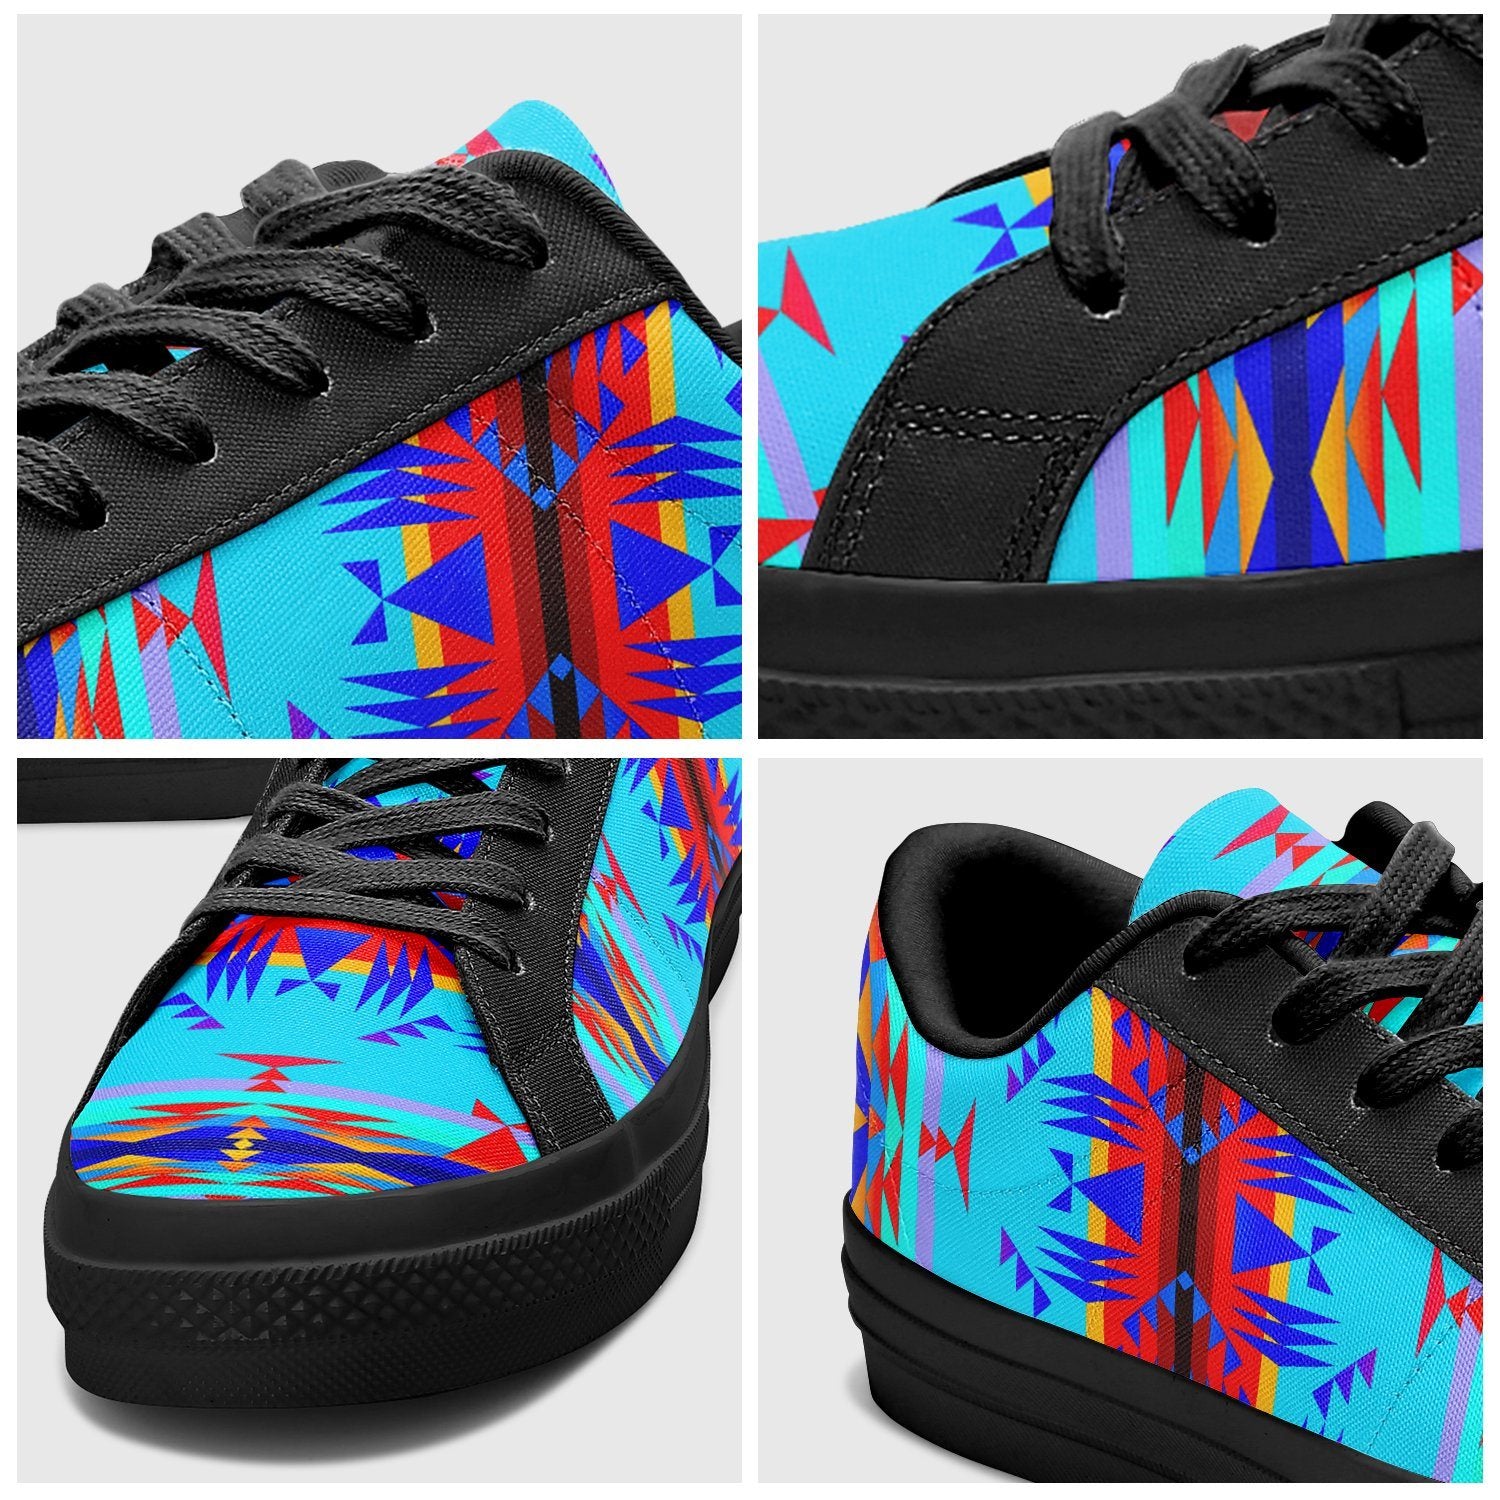 Between the Mountains Blue Aapisi Low Top Canvas Shoes Black Sole 49 Dzine 